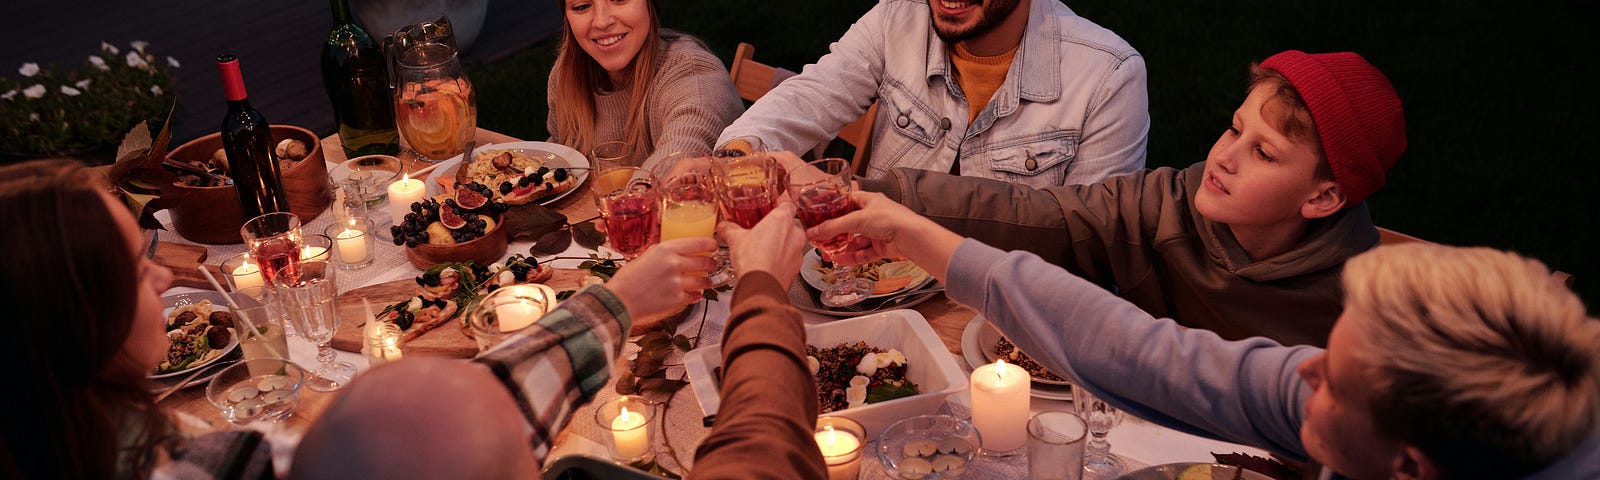 A group of people share a meal and wine around a table in a beautiful atmospheric outdoor setting and enjoy each other’s company as they raise their glasses.